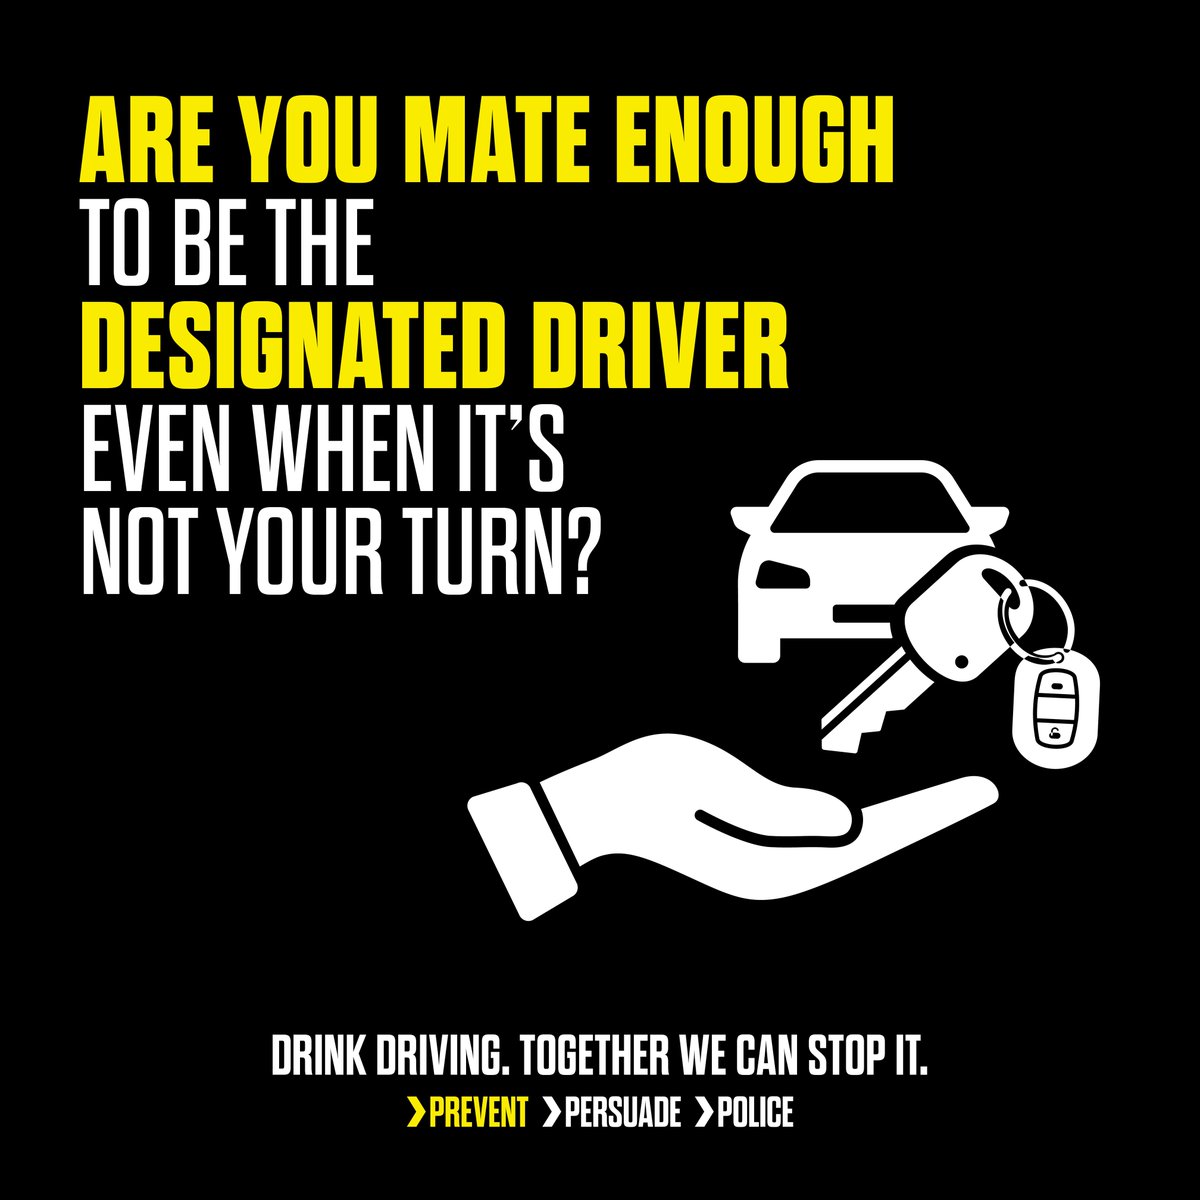 Going out tonight? Think about getting home tonight ,before you leave the house or office. Check train timetables, book a taxi or ask someone for a lift. Be a mate, be the designated driver, even if it's not your turn. #DrinkDrivingTogetherWeCanStopIt esxpol.uk/MxfpZ